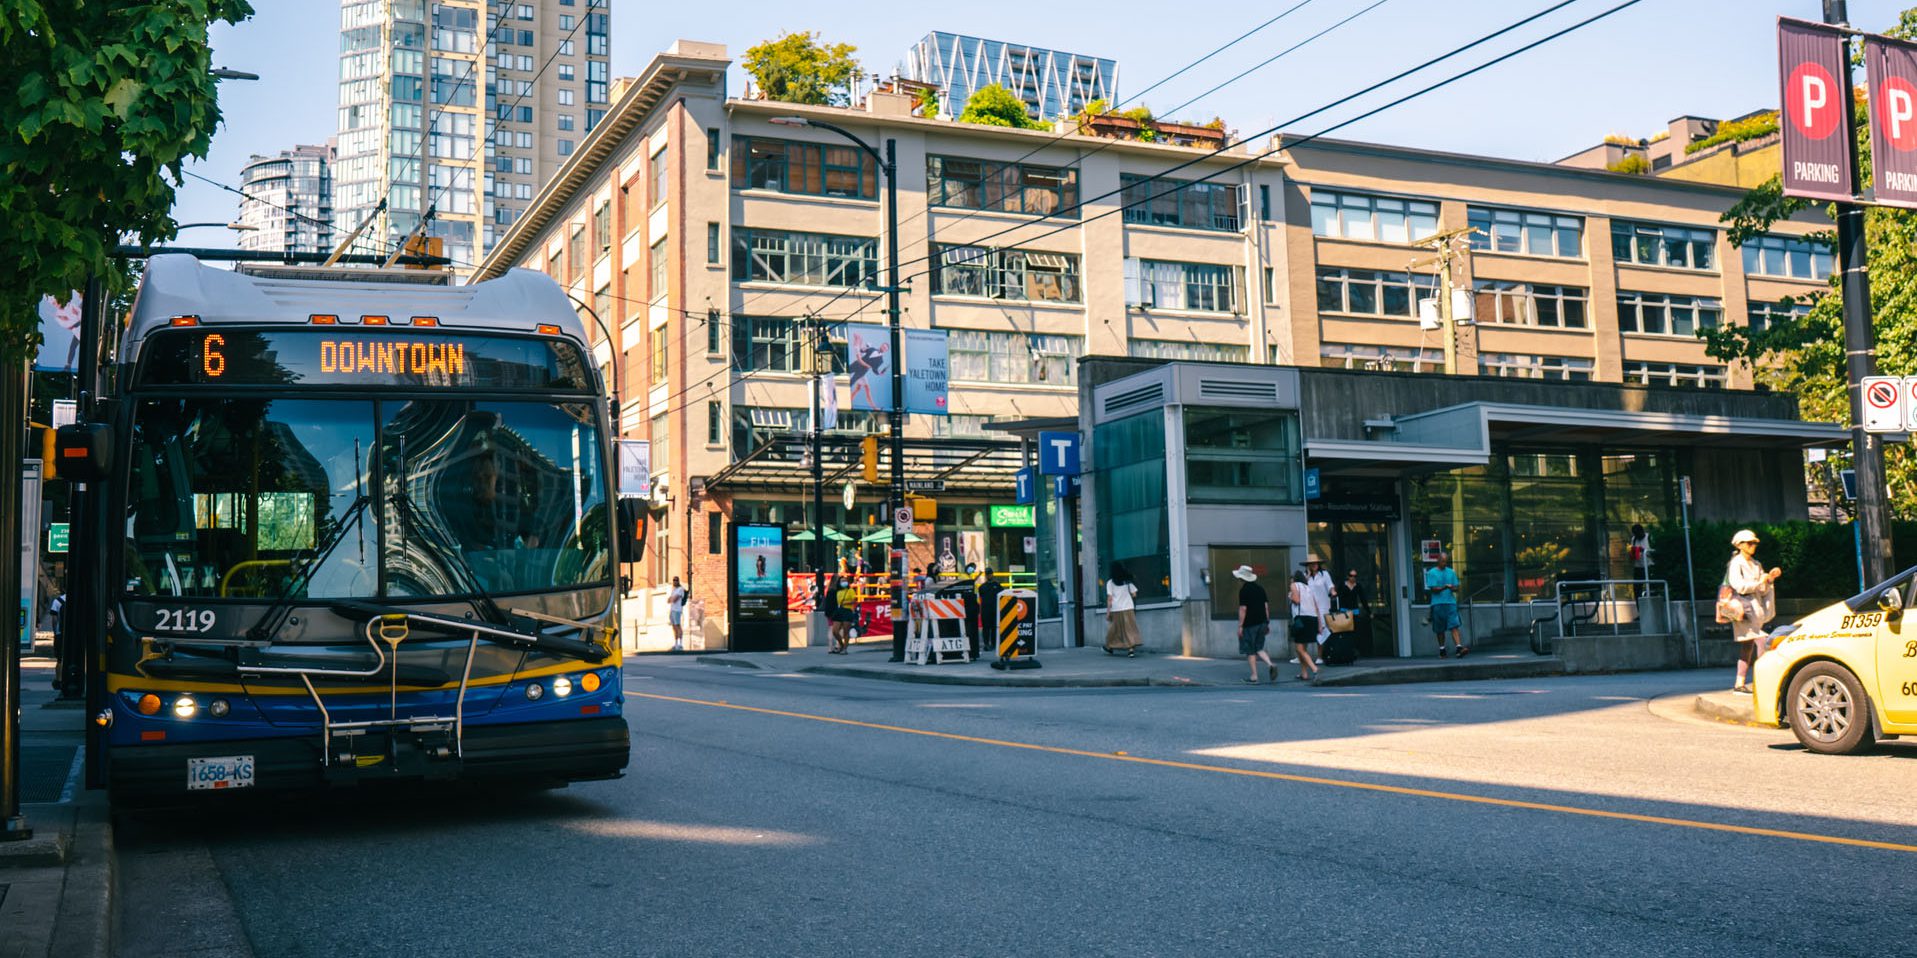 The number 6 Downtown bus, one of the top 10 bus routes, stops at a bus stop in Vancouver. 